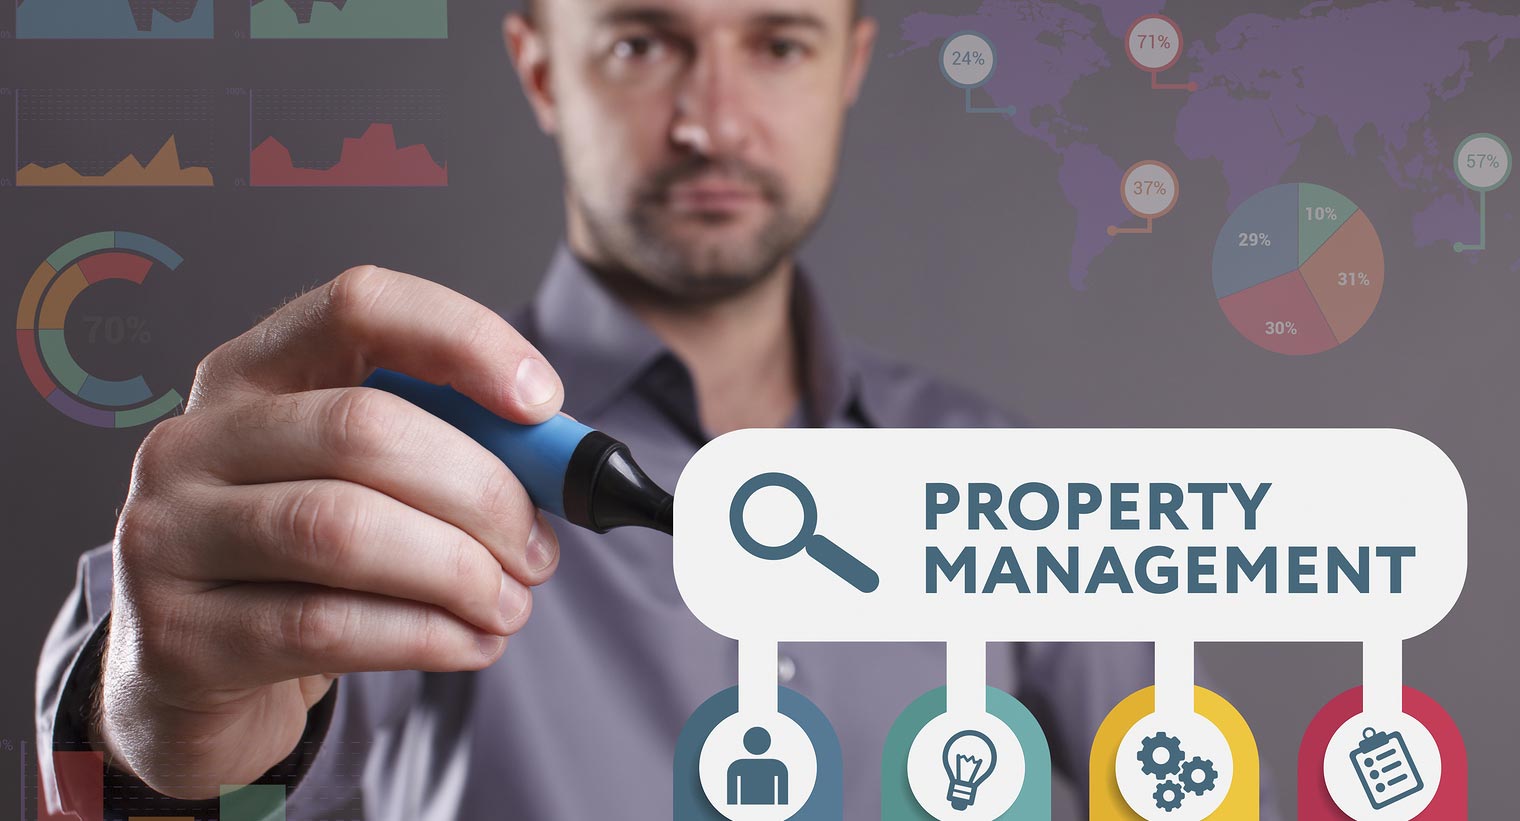 property manager outlines areas of property management